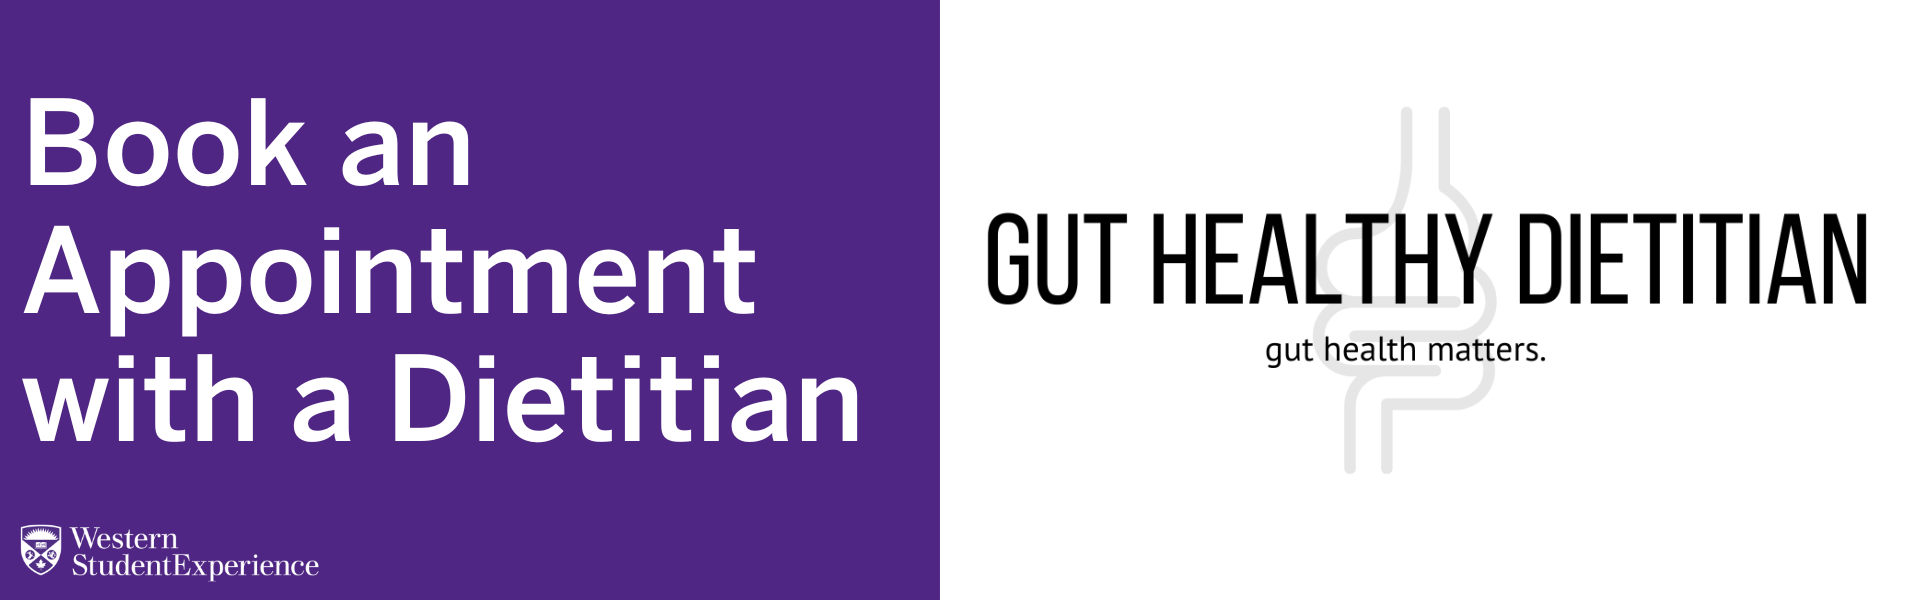 book an appointment with a dietitian